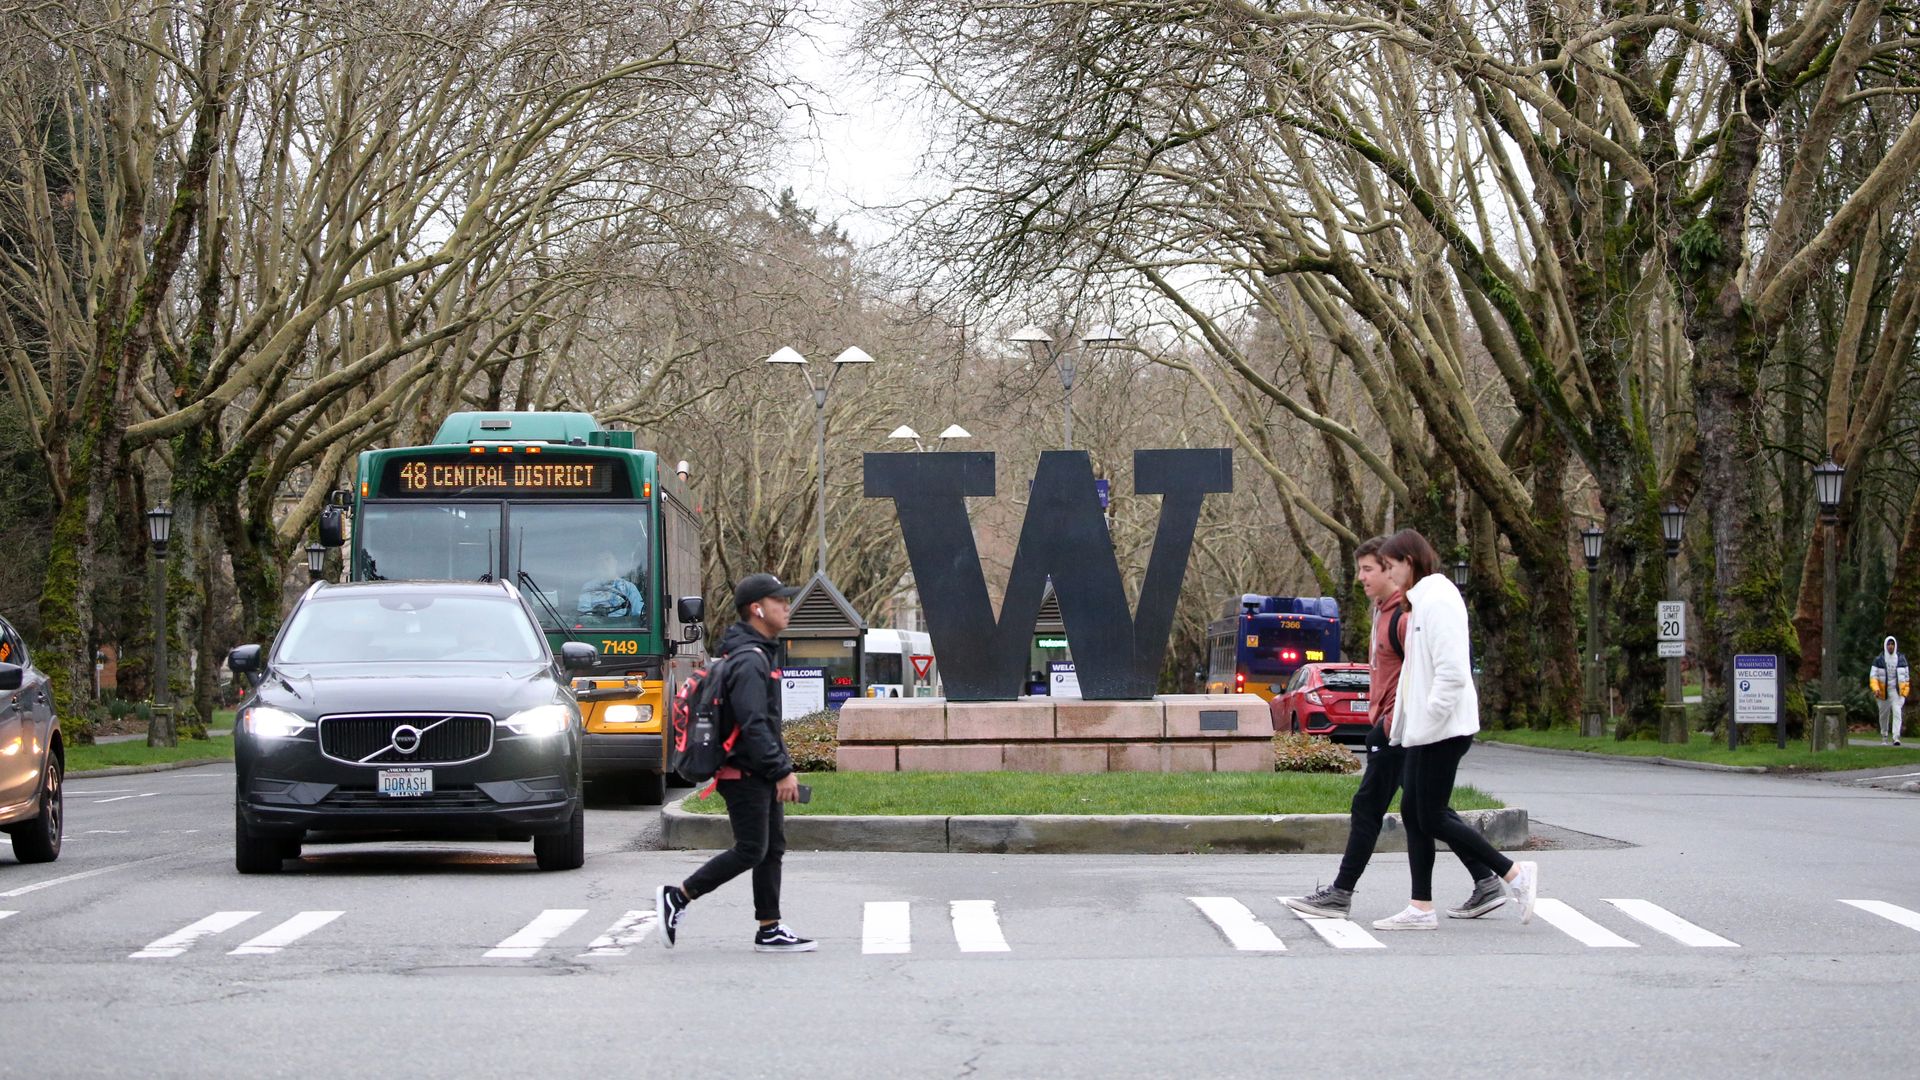 People walk along a crosswalk in front of the "W" sign at the entry of the University of Washington, flanked by trees and traffic.